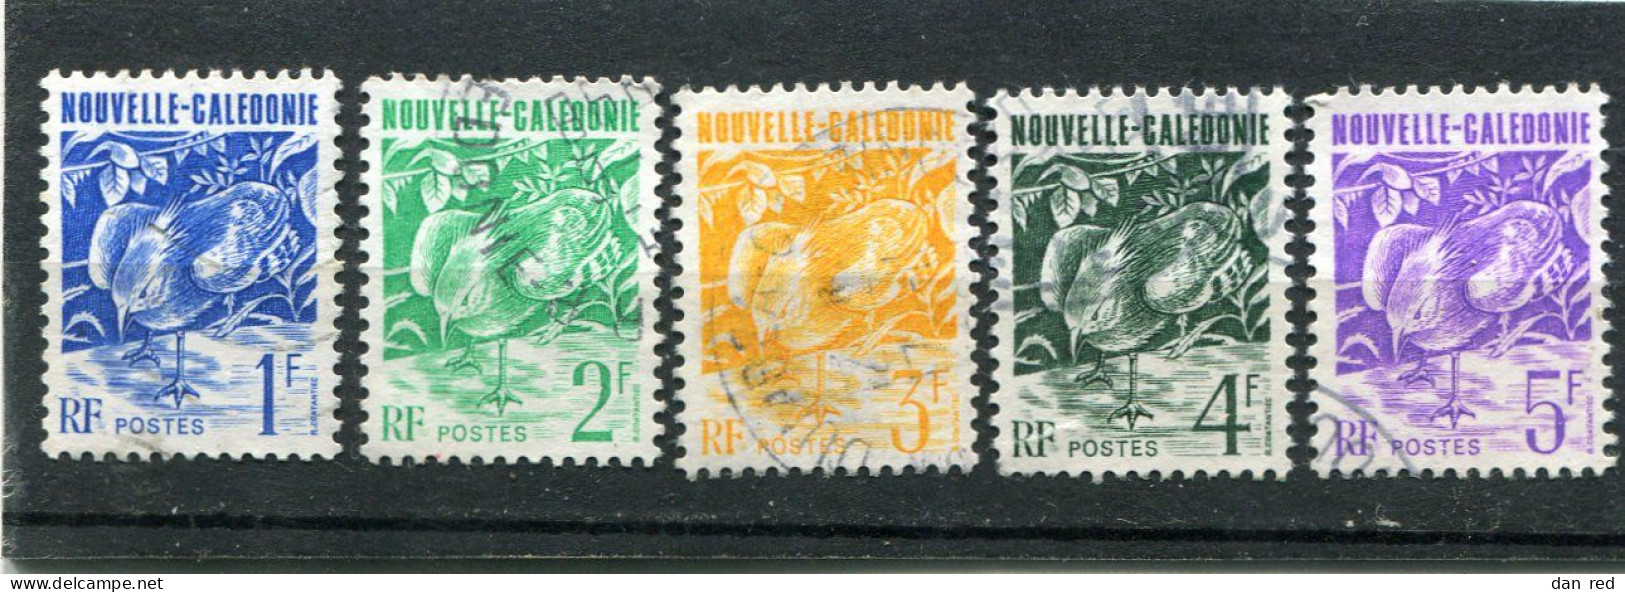 NOUVELLE CALEDONIE N° 602 A 608 (Y&T) (Oblitéré) - Used Stamps